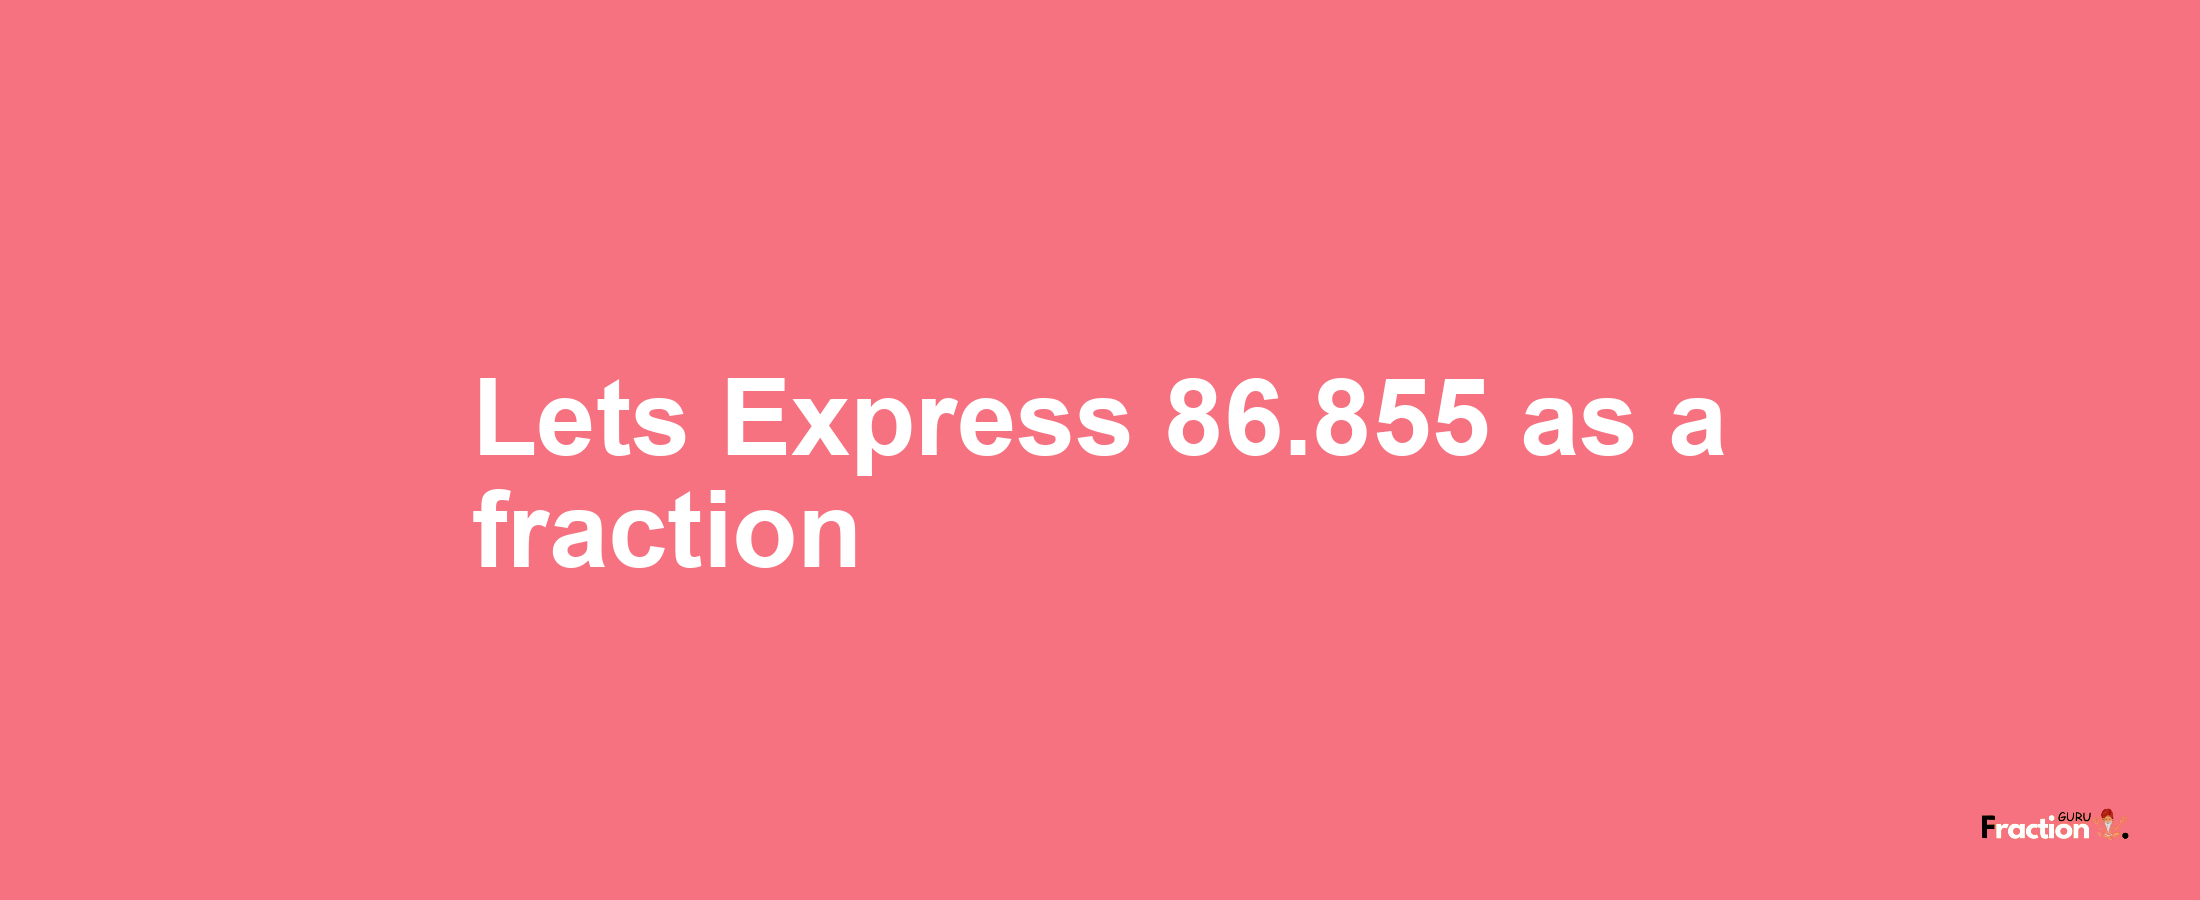 Lets Express 86.855 as afraction